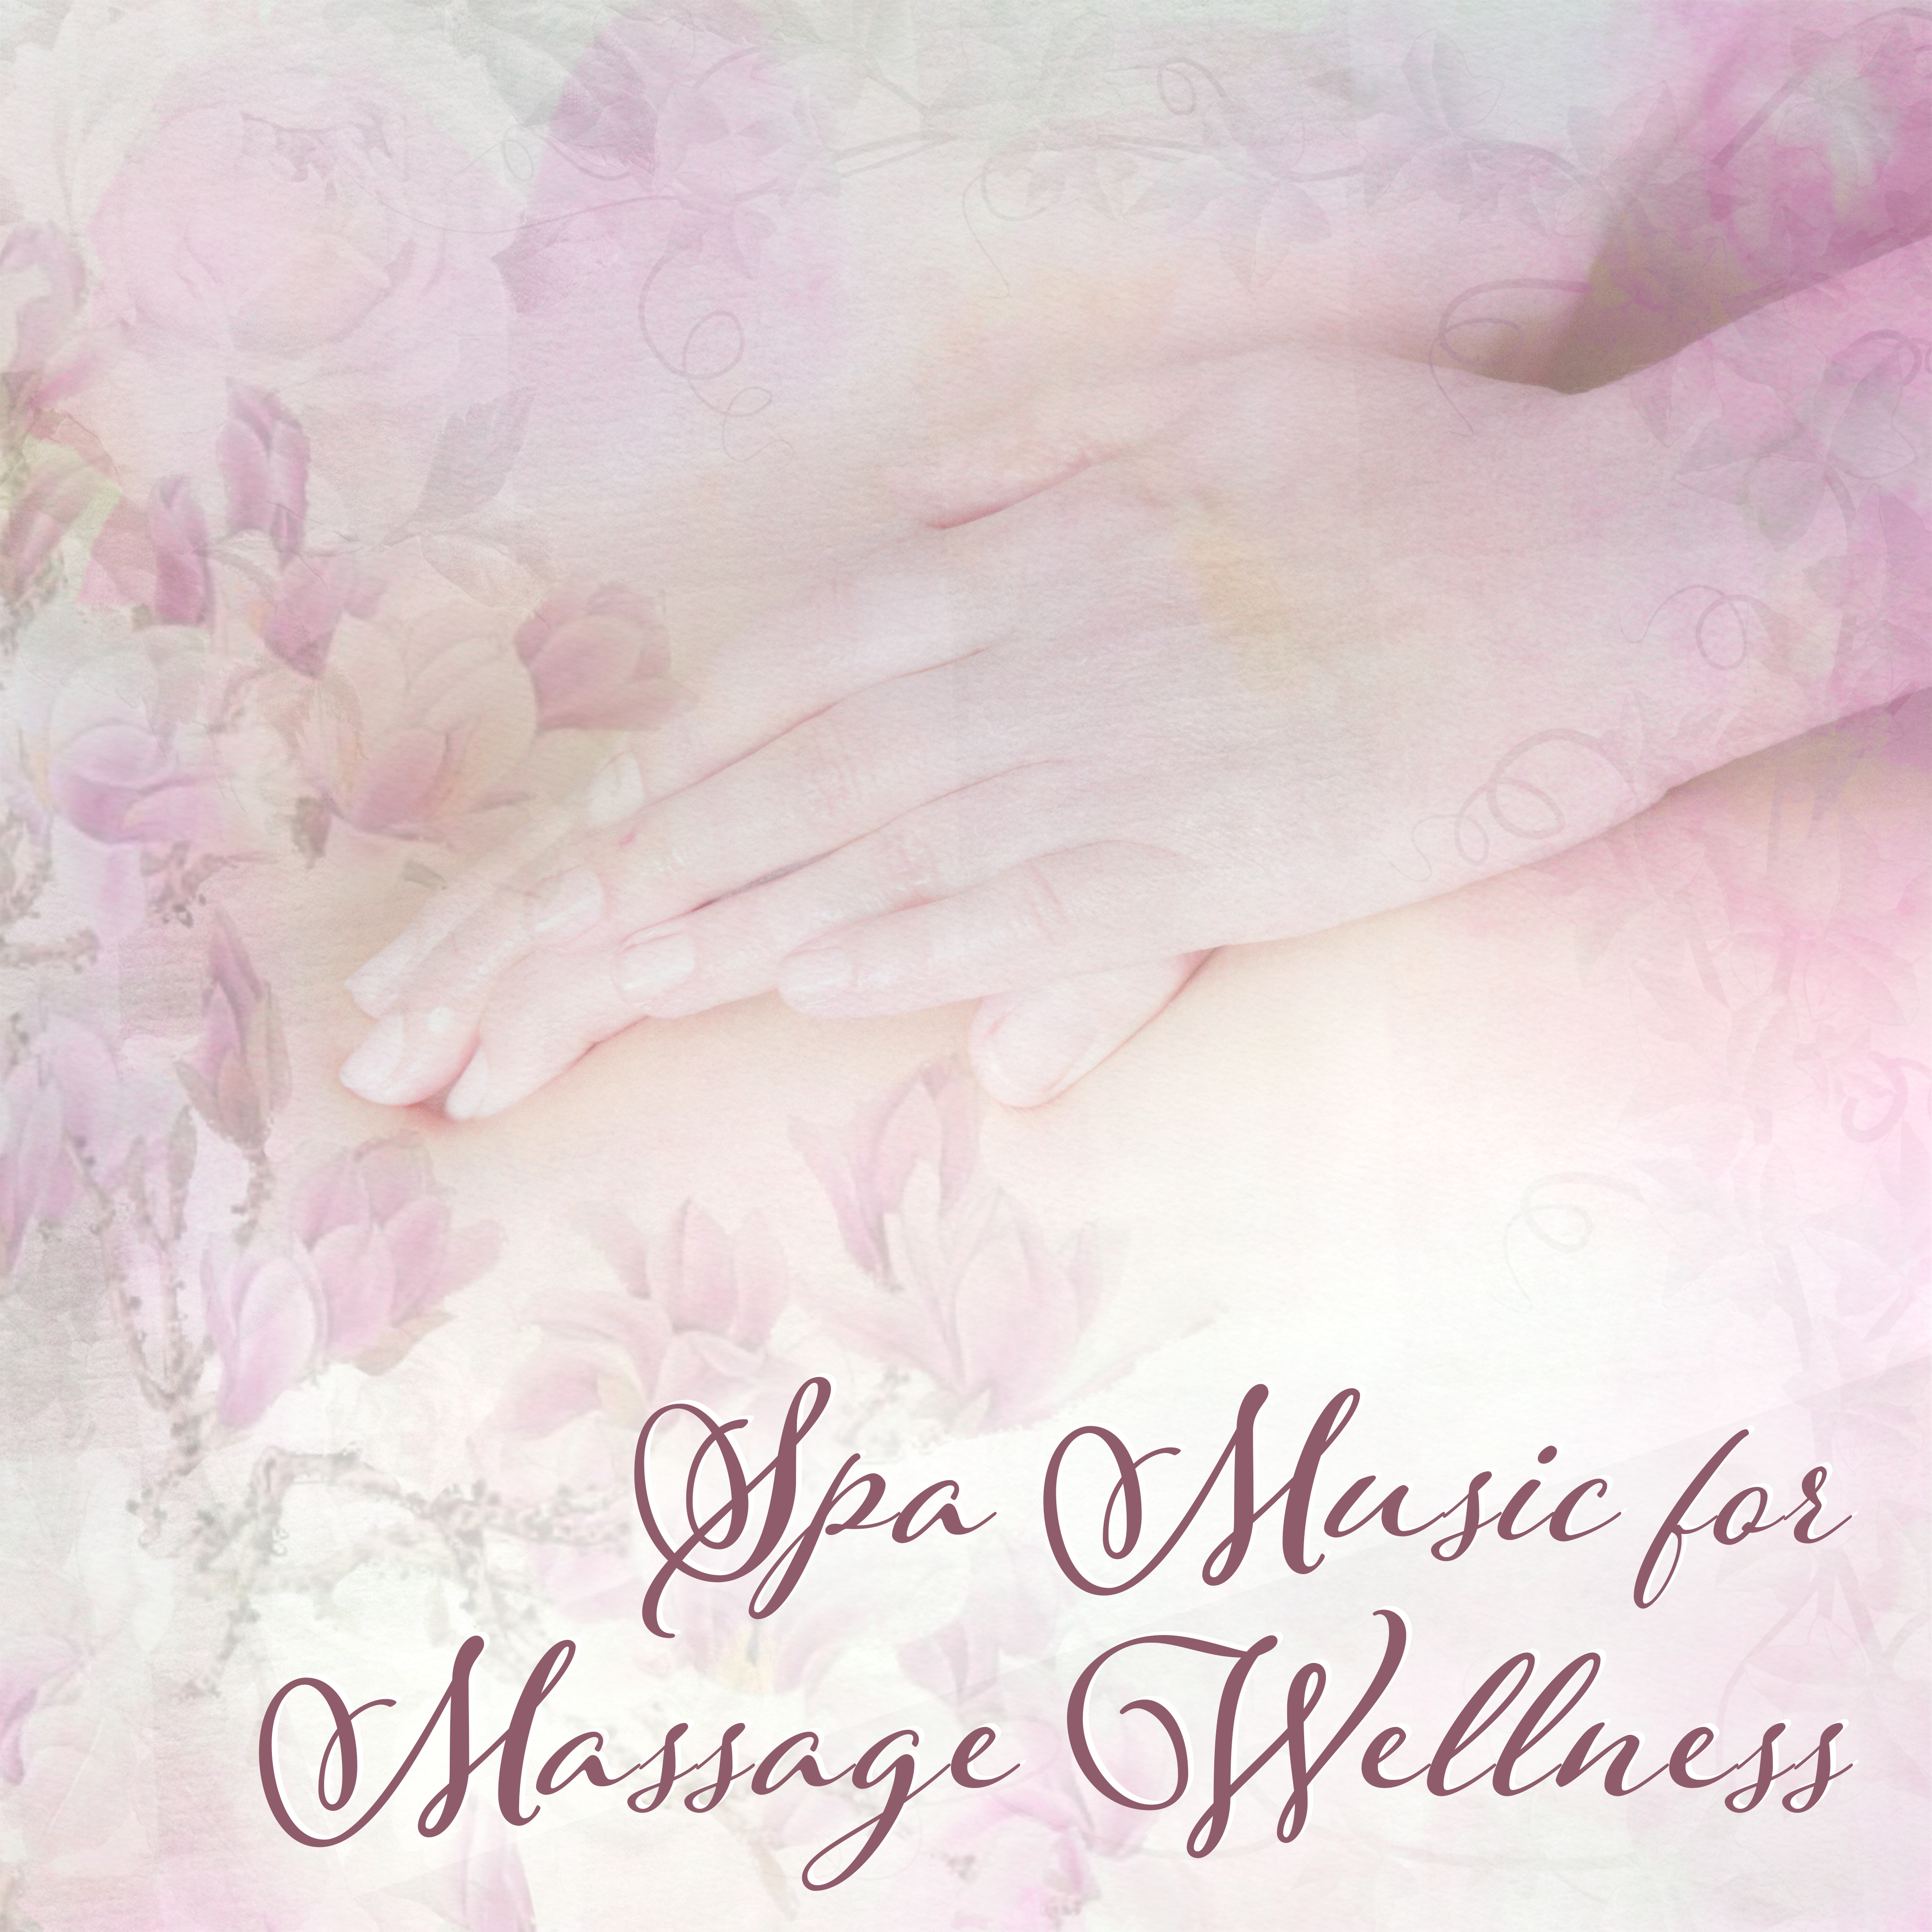 Spa Music for Massage Wellness – Pure Mind, Soft Nature Sounds Reduce Stress, Massage Therapy, Relaxation Spa, Healing Body, Peaceful Music